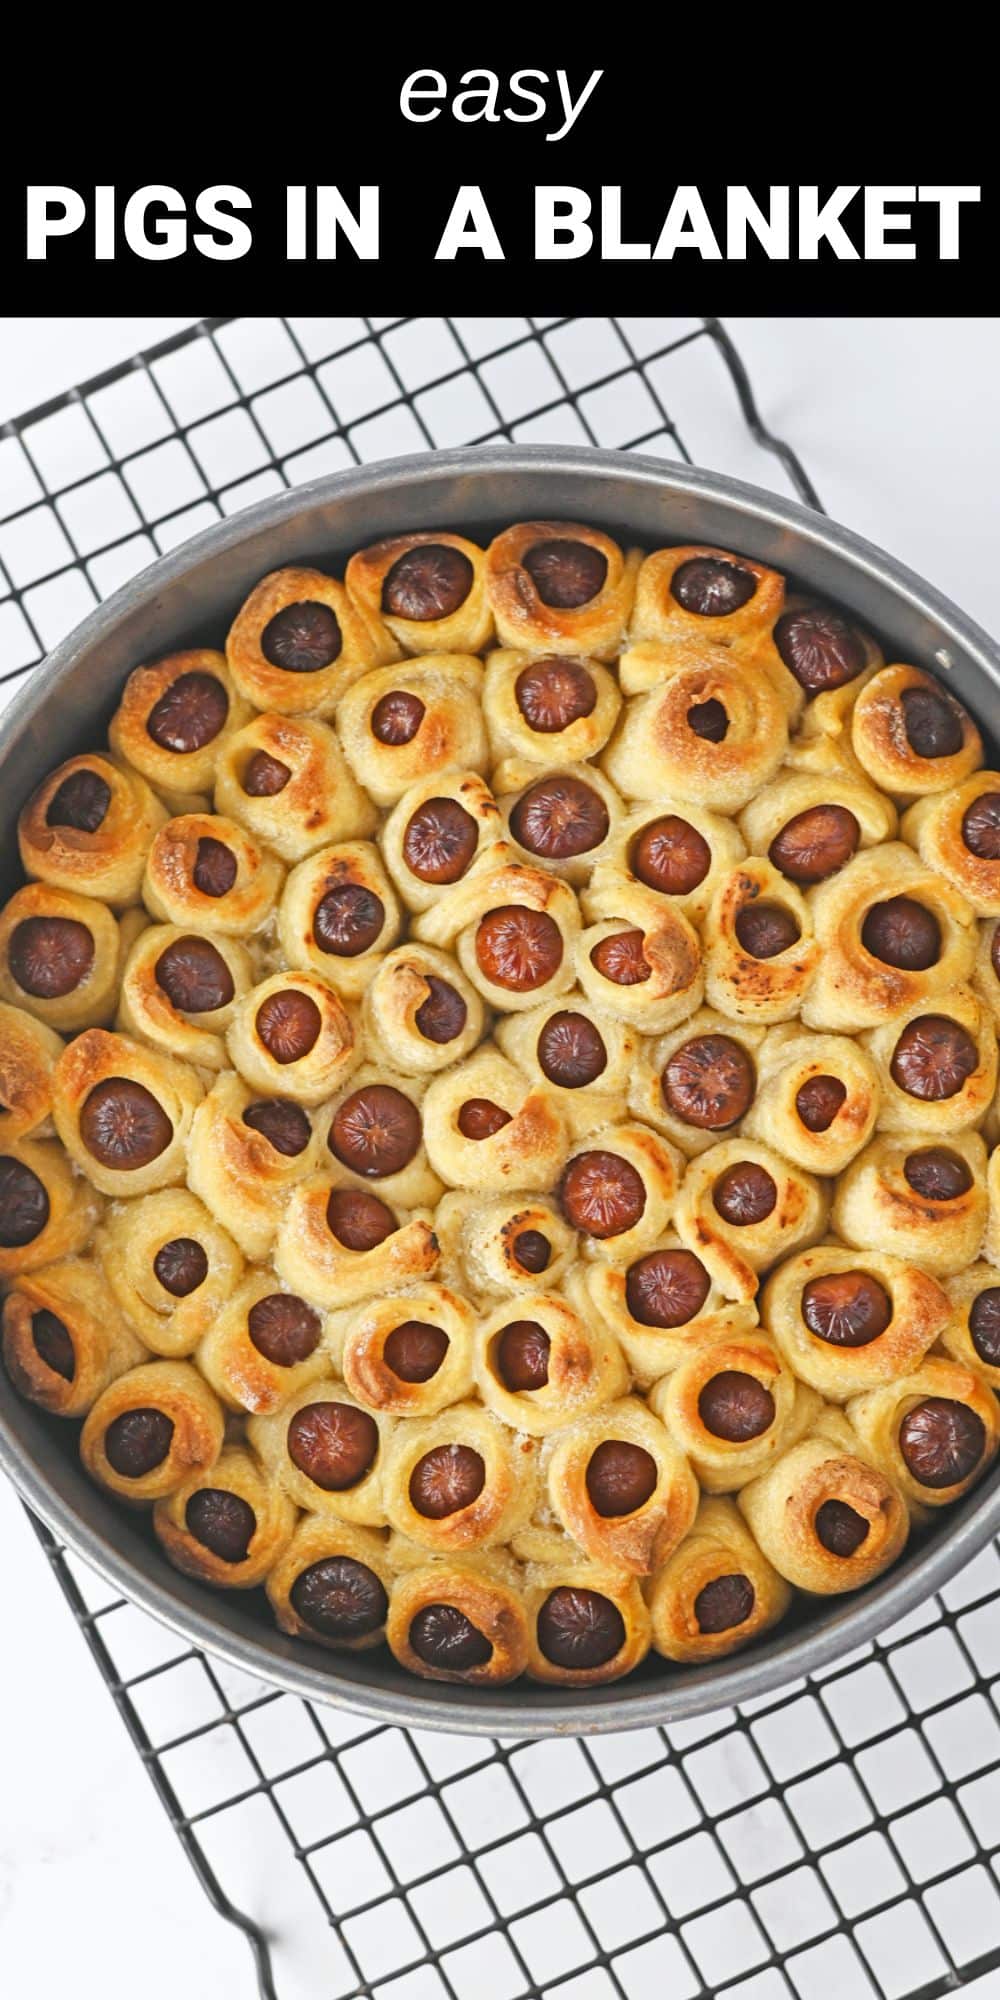 These easy pull apart Pigs in a Blanket are a delicious and fun twist on the classic party appetizer. Instead of crescent roll dough, these tasty bites are wrapped in pizza dough and baked to golden brown perfection in a spring-form pan.  